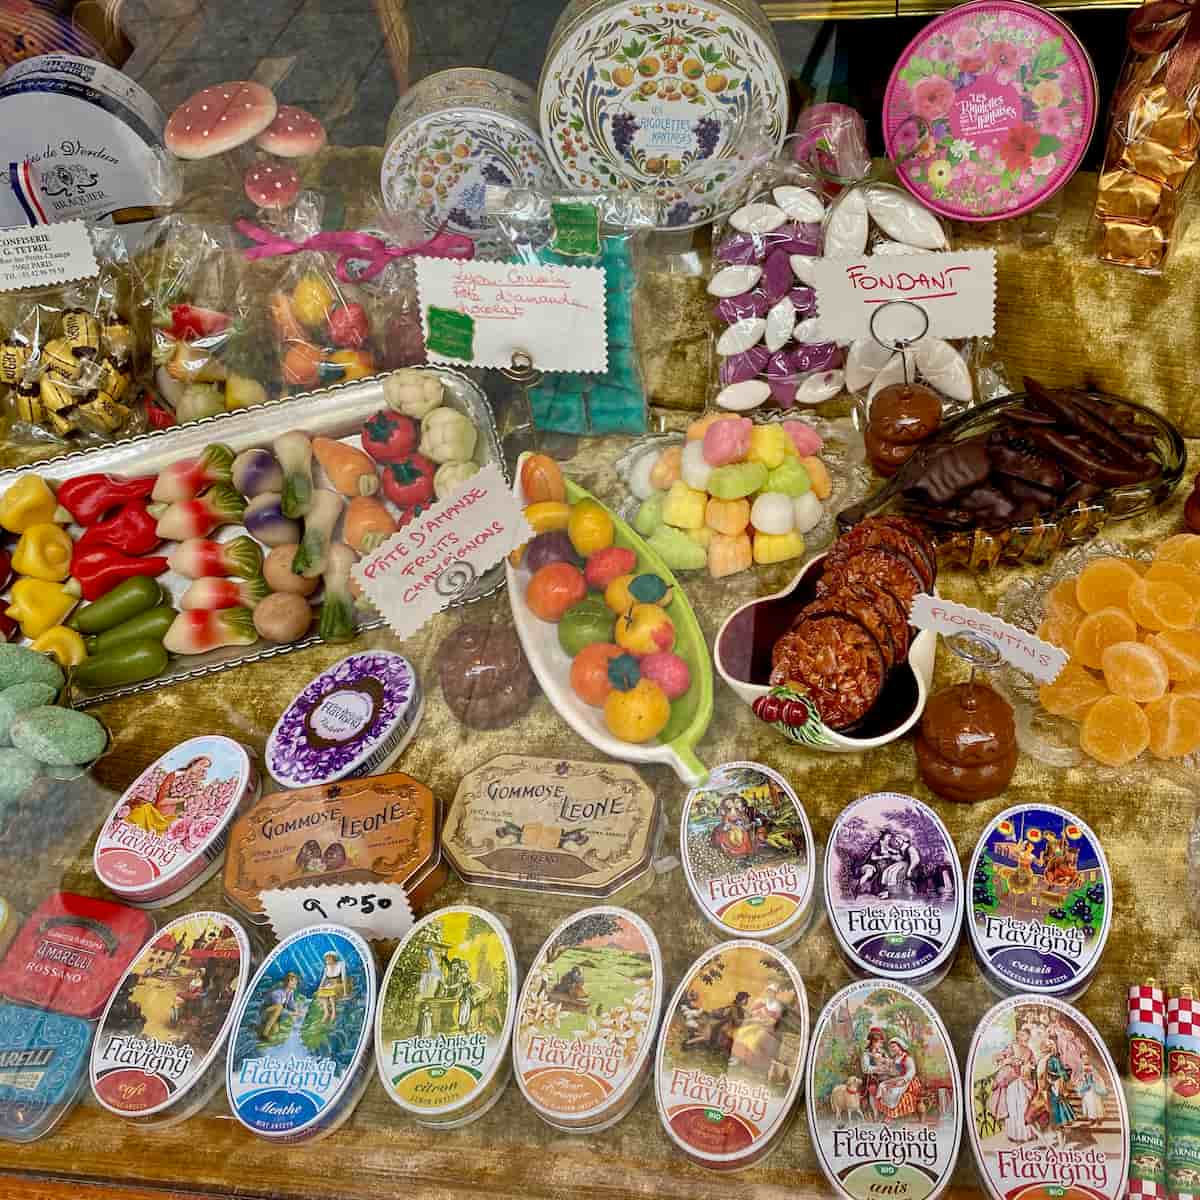 Parisian shop window packed with different artisanal candies